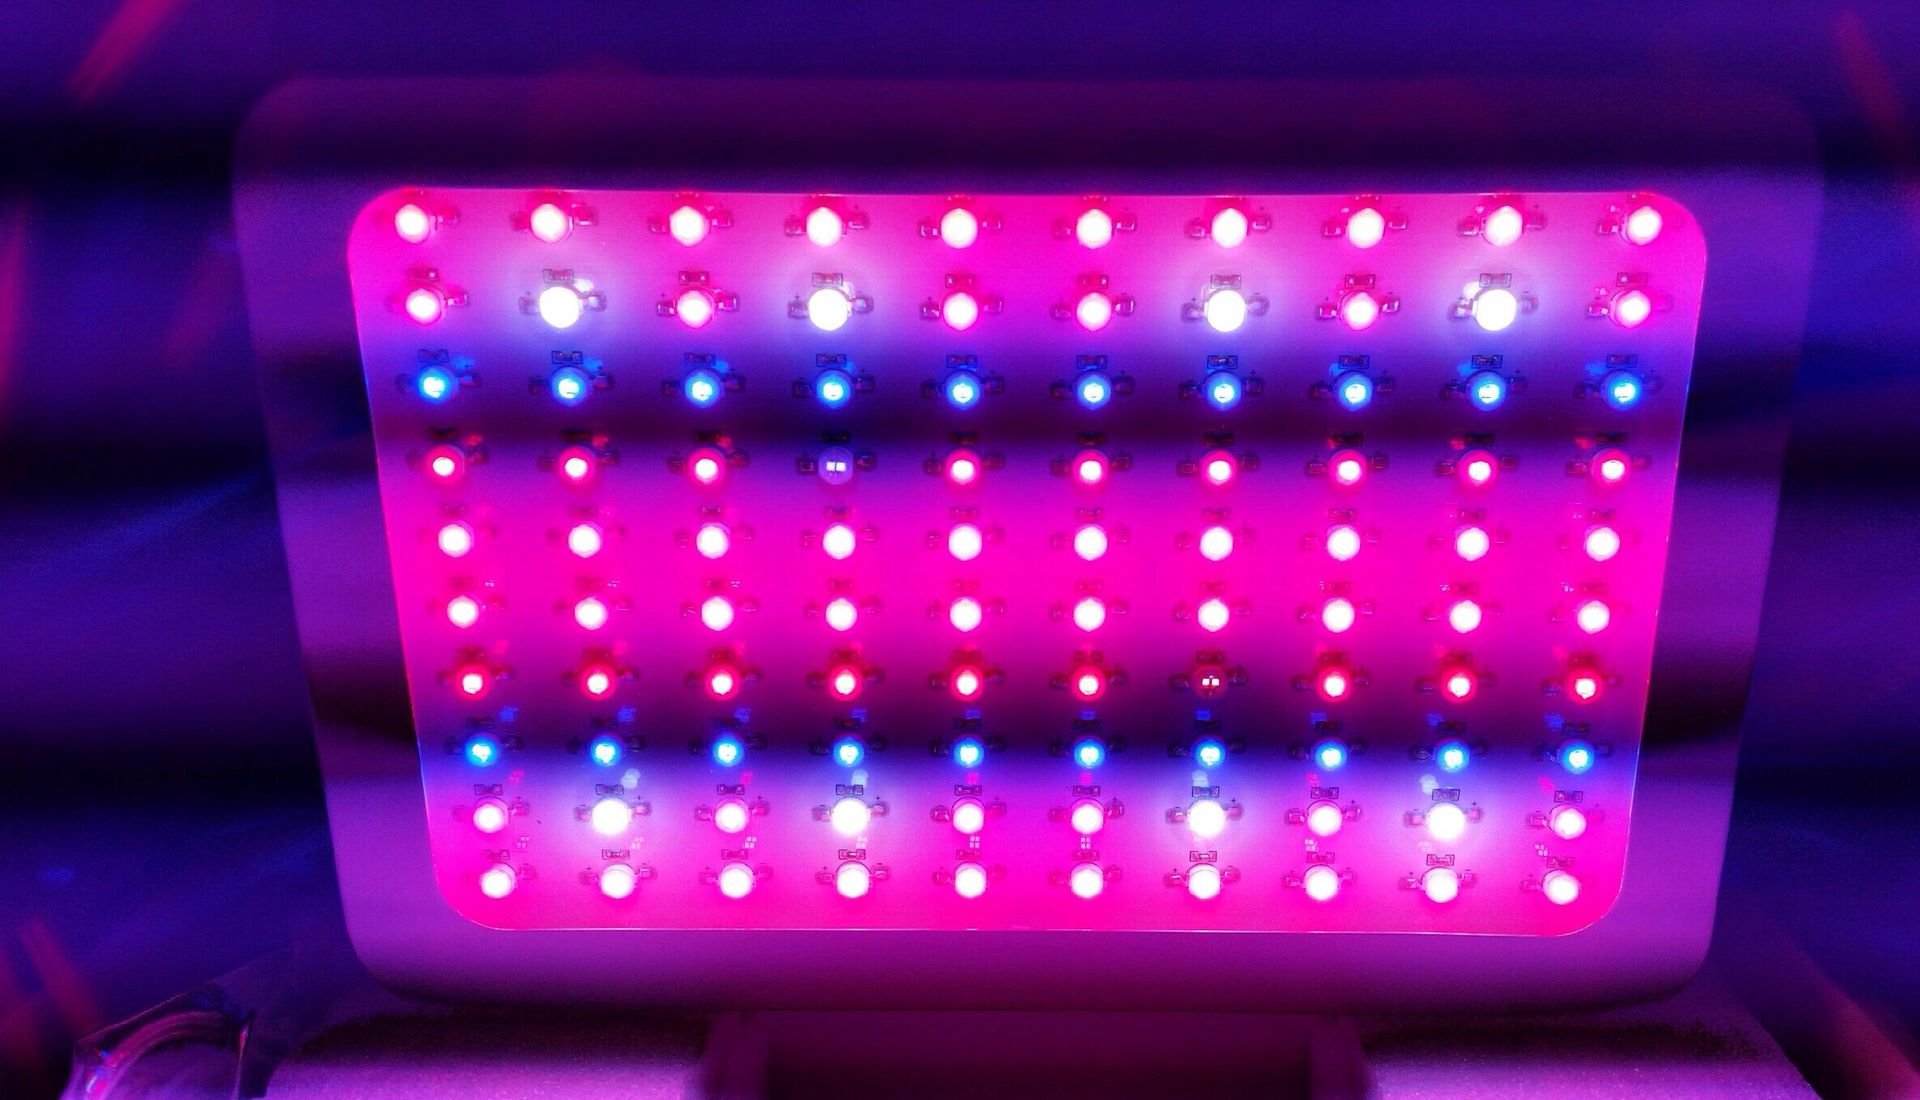 1000w full spectrum led Grow light. IR and UV diodes. More equipment available: LEDs hps lec cmh tents fans carbon filters and full kits, dwc